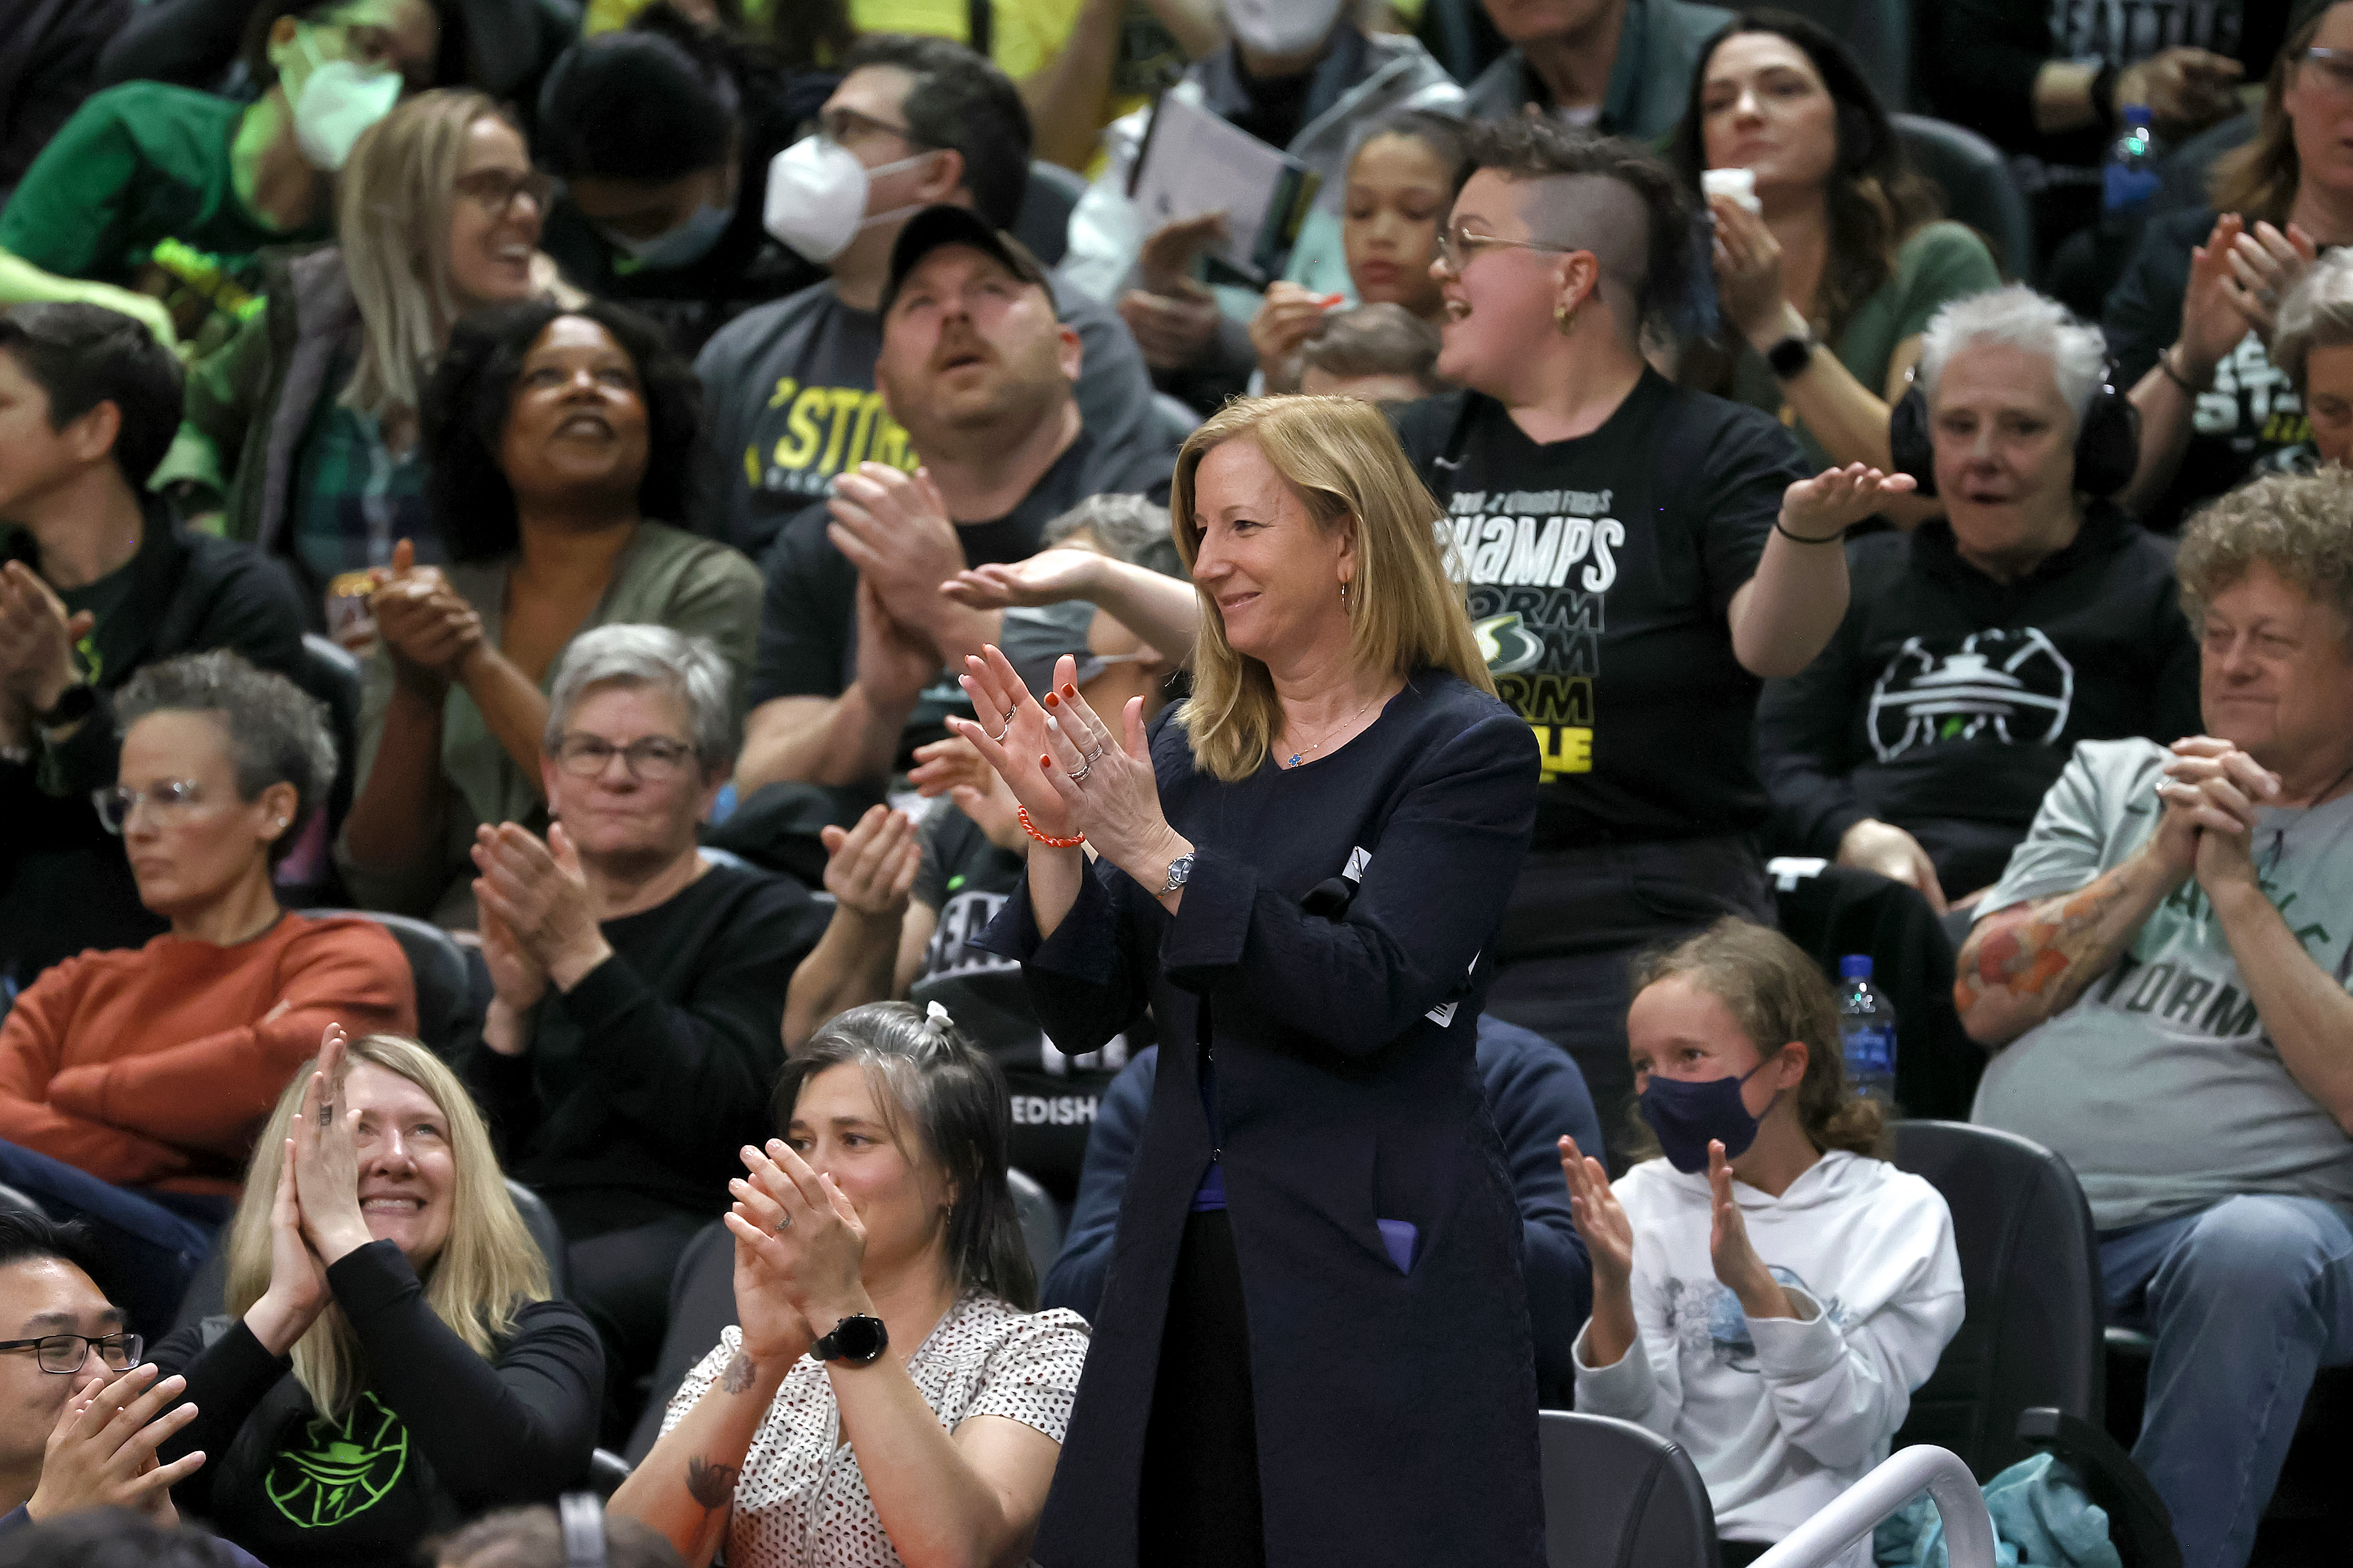 WNBA commissioner Cathy Engelbert is announced during the game between the Seattle Storm and the Minnesota Lynx at Climate Pledge Arena on May 06, 2022 in Seattle, Washington. (Steph Chambers/Getty Images)